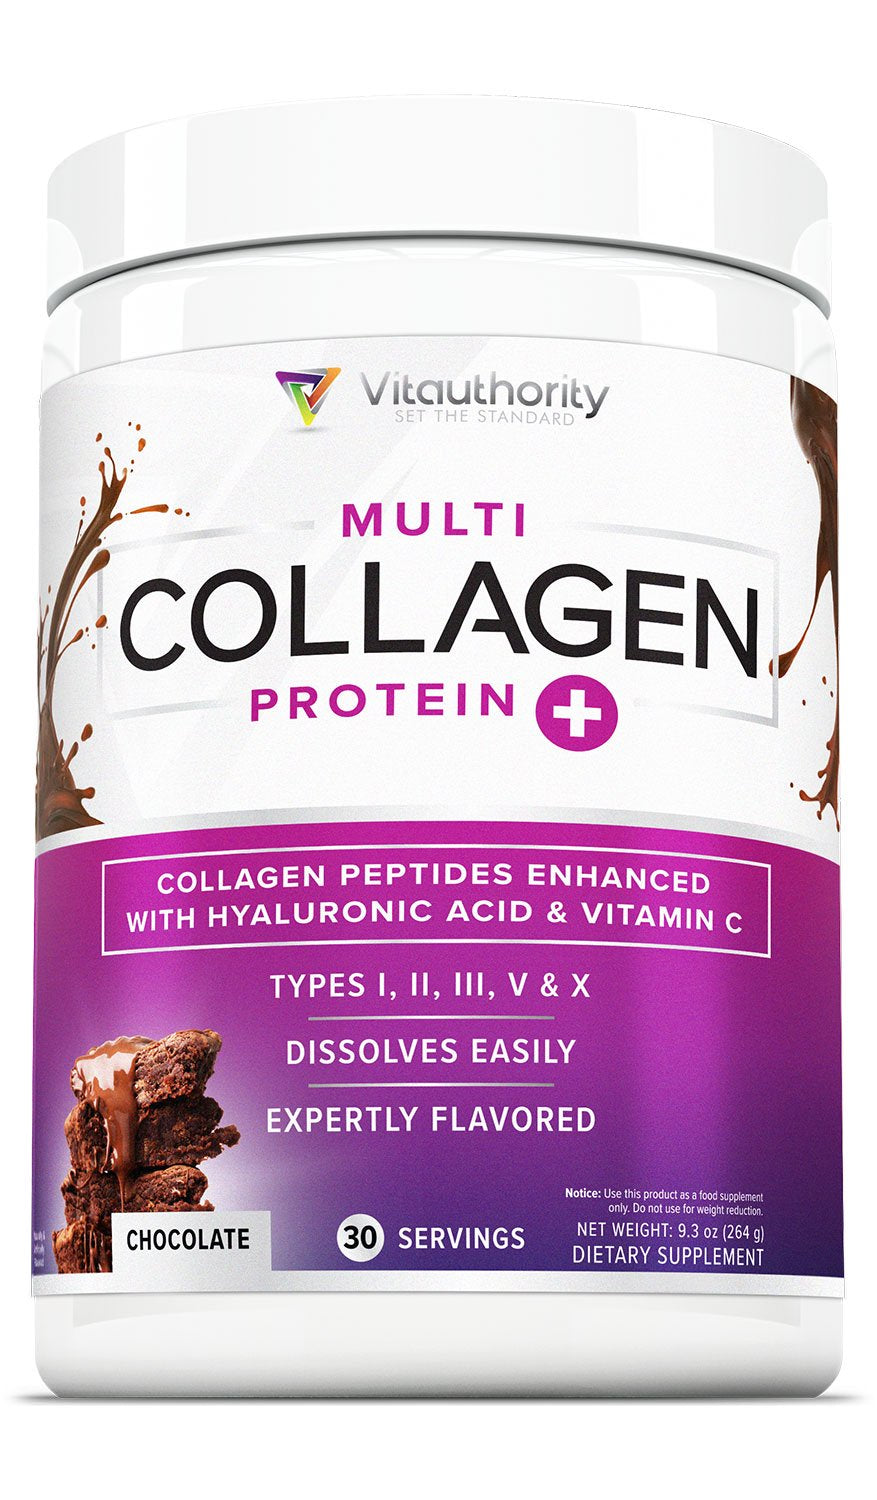 Multi Collagen Peptides plus Hyaluronic Acid and Vitamin C, Hydrolyzed Collagen Protein, Types I, II, III, V and X Collagen, Chocolate Flavor, 30 Servings